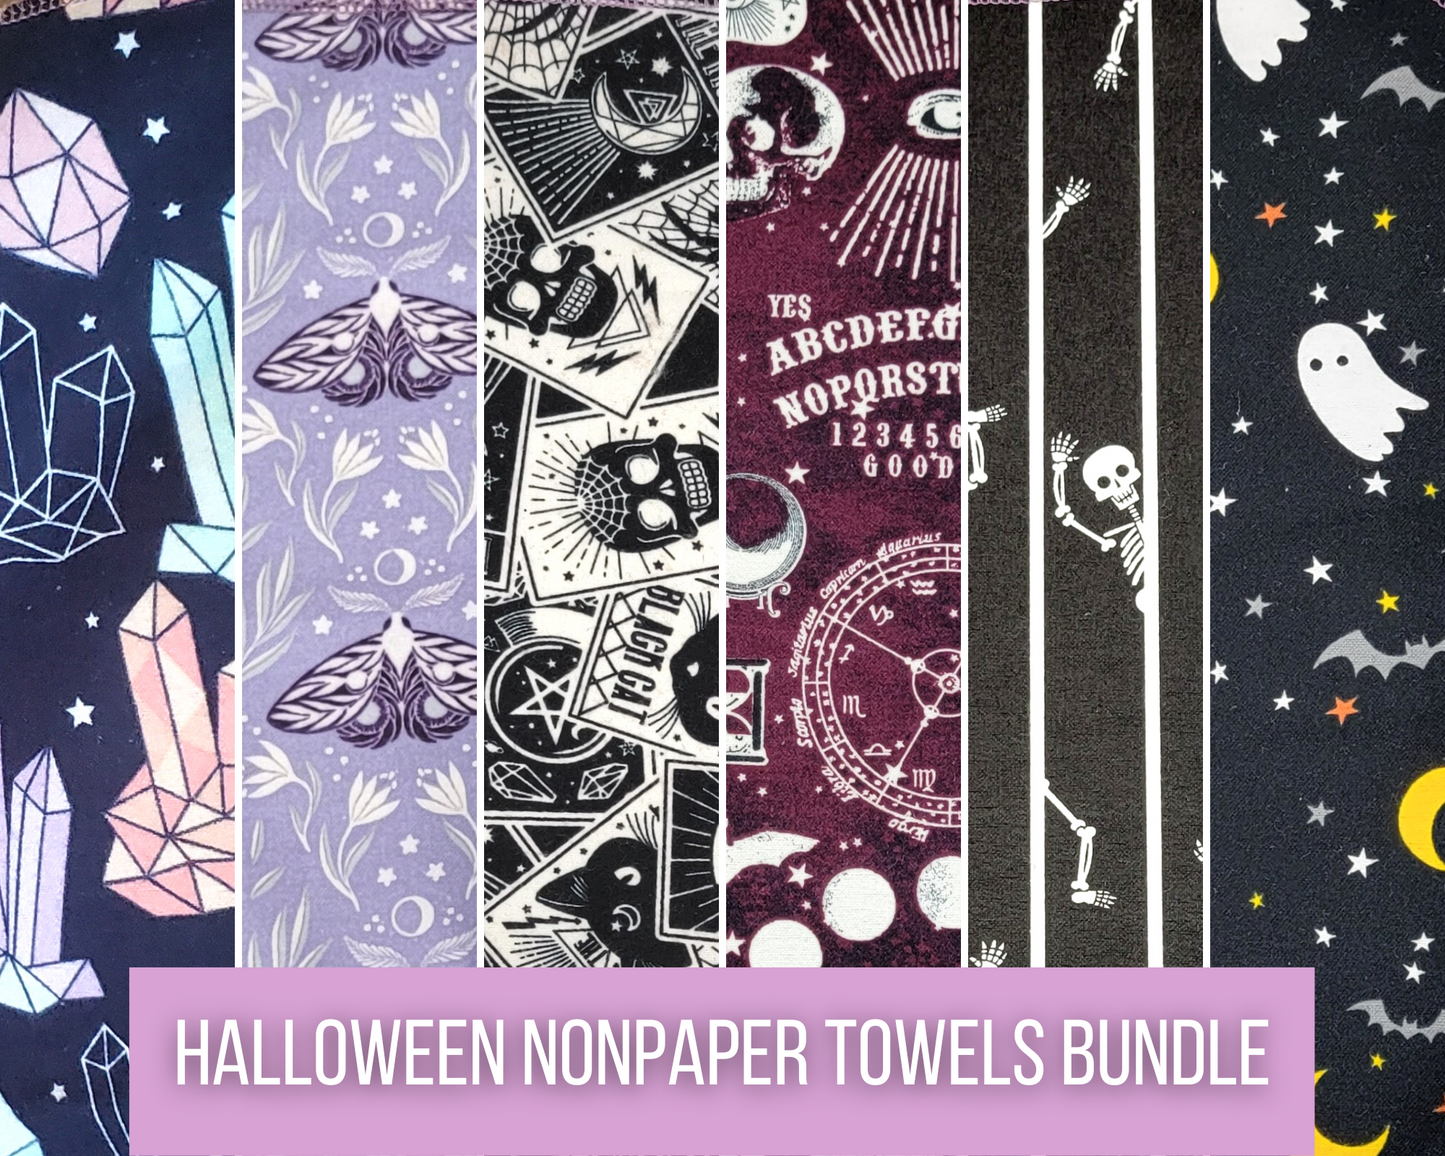 Halloween Bundle of NonPaper Towels. A collage of 6 prints - crystals, moths, tarot cards, ouija board, skeletons, and ghosts.